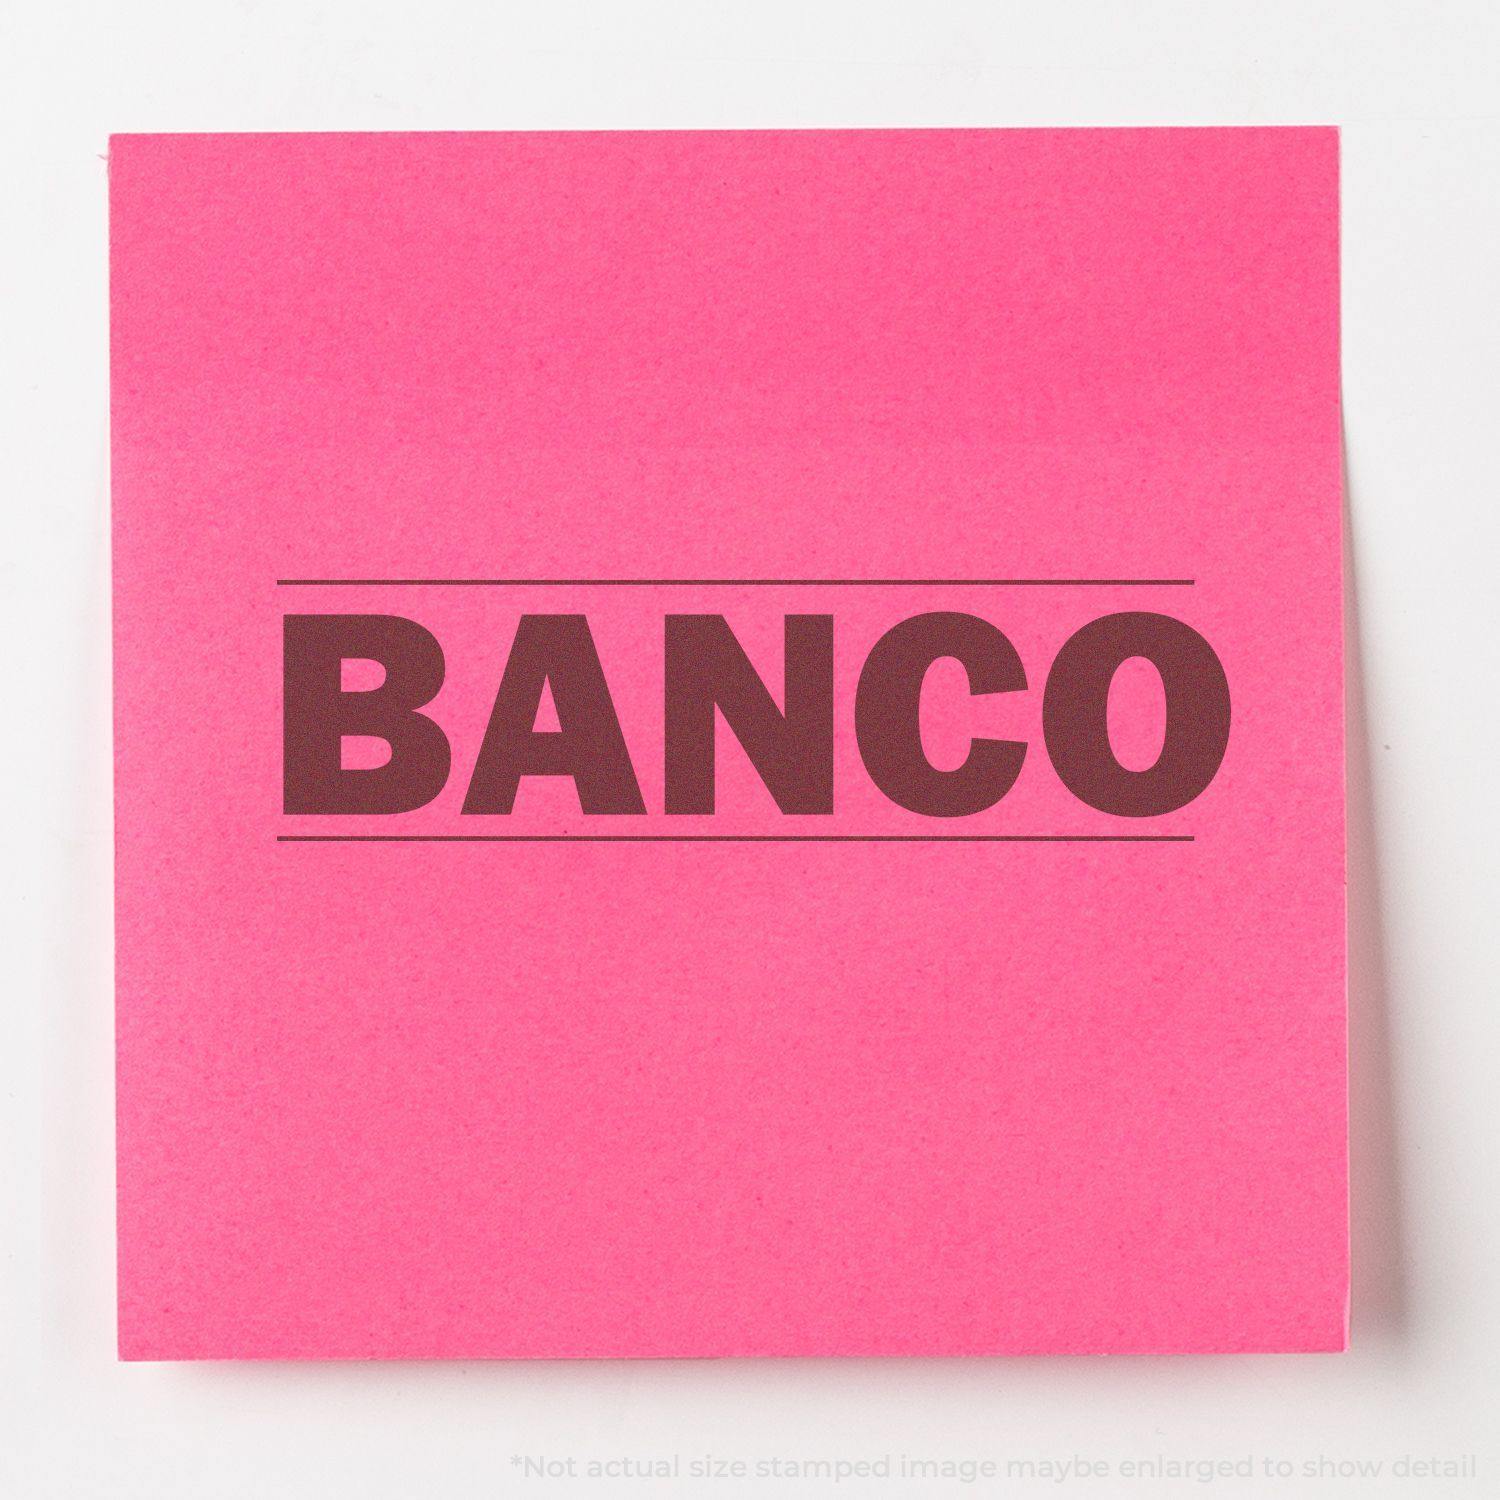 A self-inking stamp with a stamped image showing how the text "BANCO" in a large bold font is displayed by it after stamping.